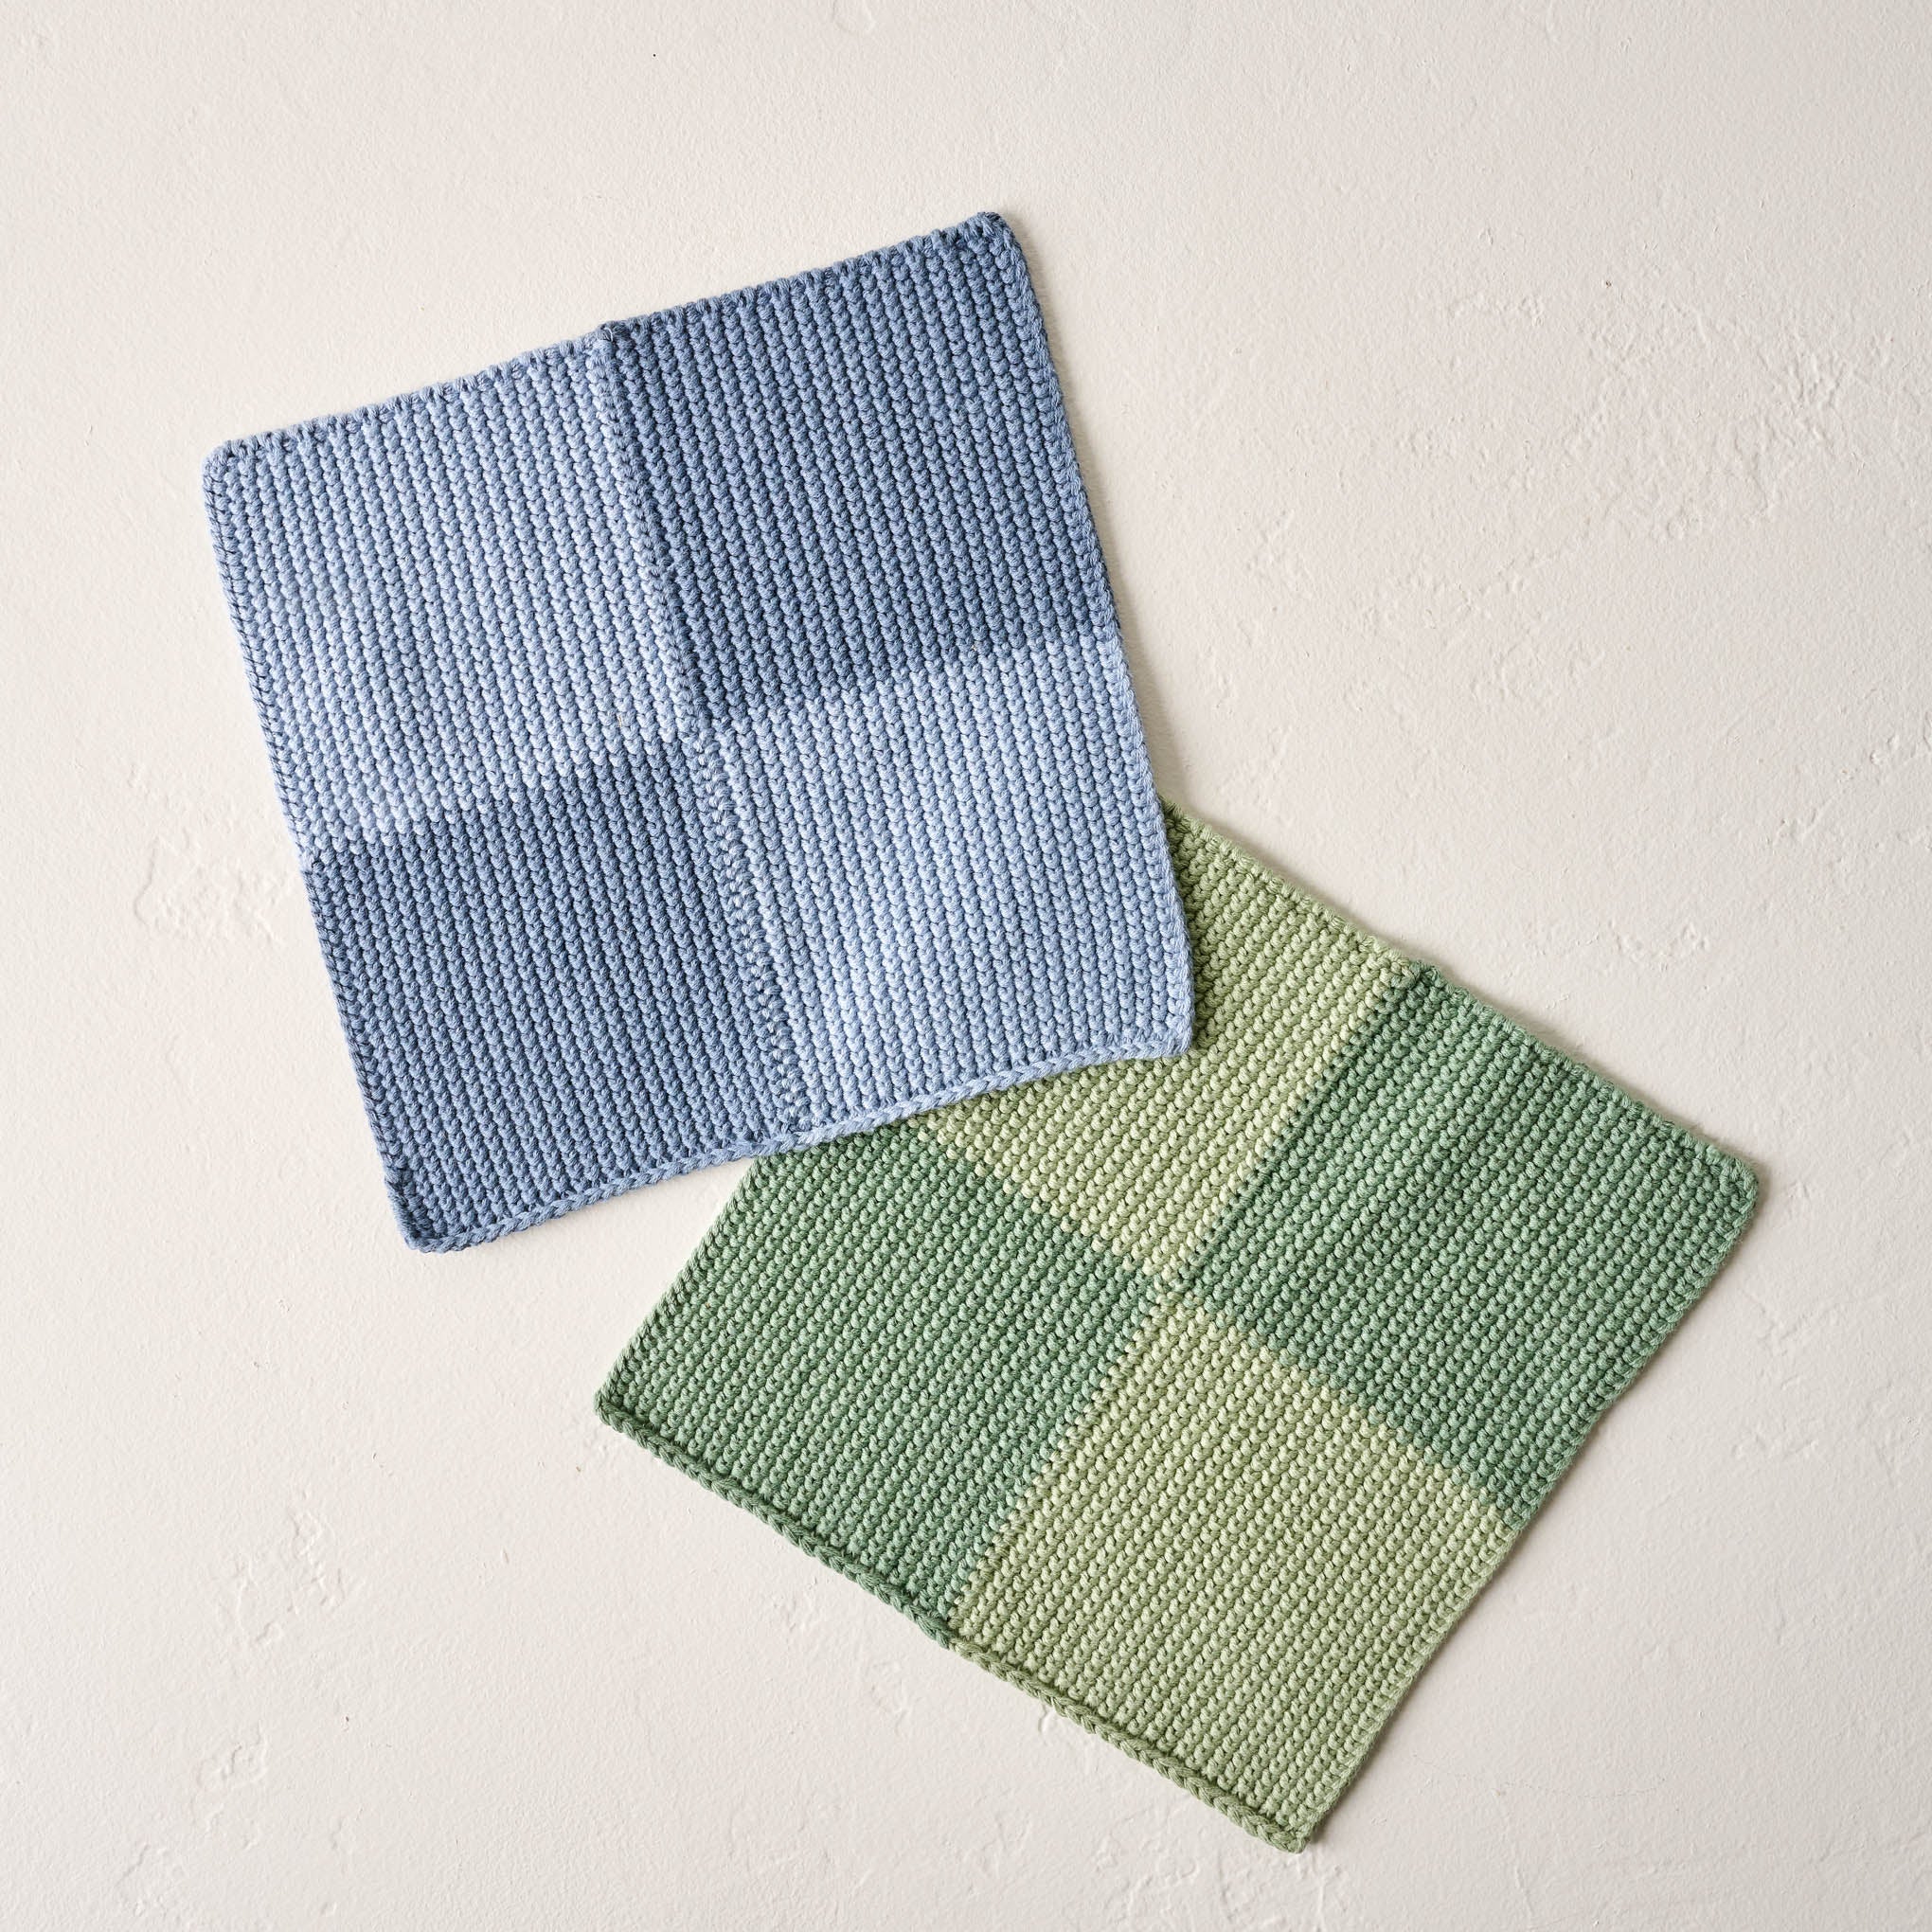 two cotton knitted washcloths in blue checkerboard and green checkerboard On sale for $16.00, discounted from $20.00